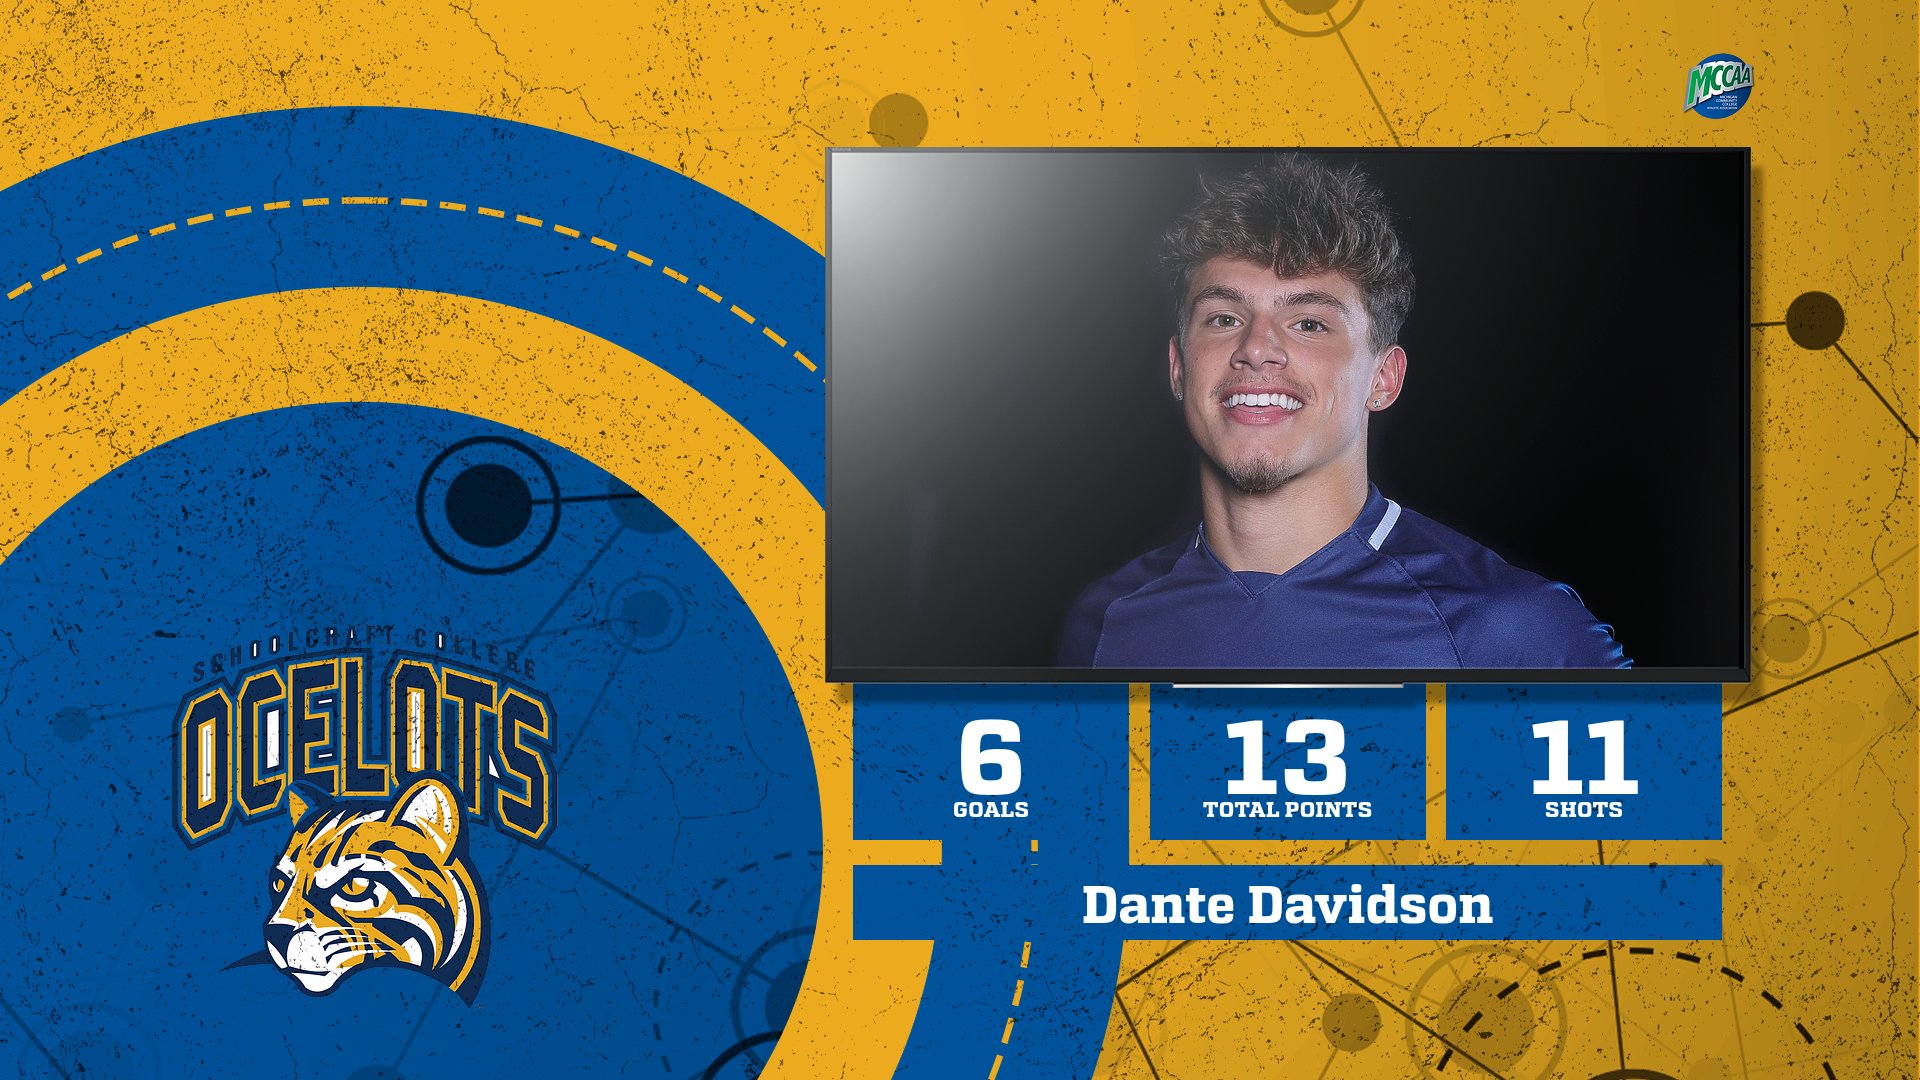 Dante Davidson, Schoolcraft College, is the MCCAA Men's Soccer Player of the Week#8